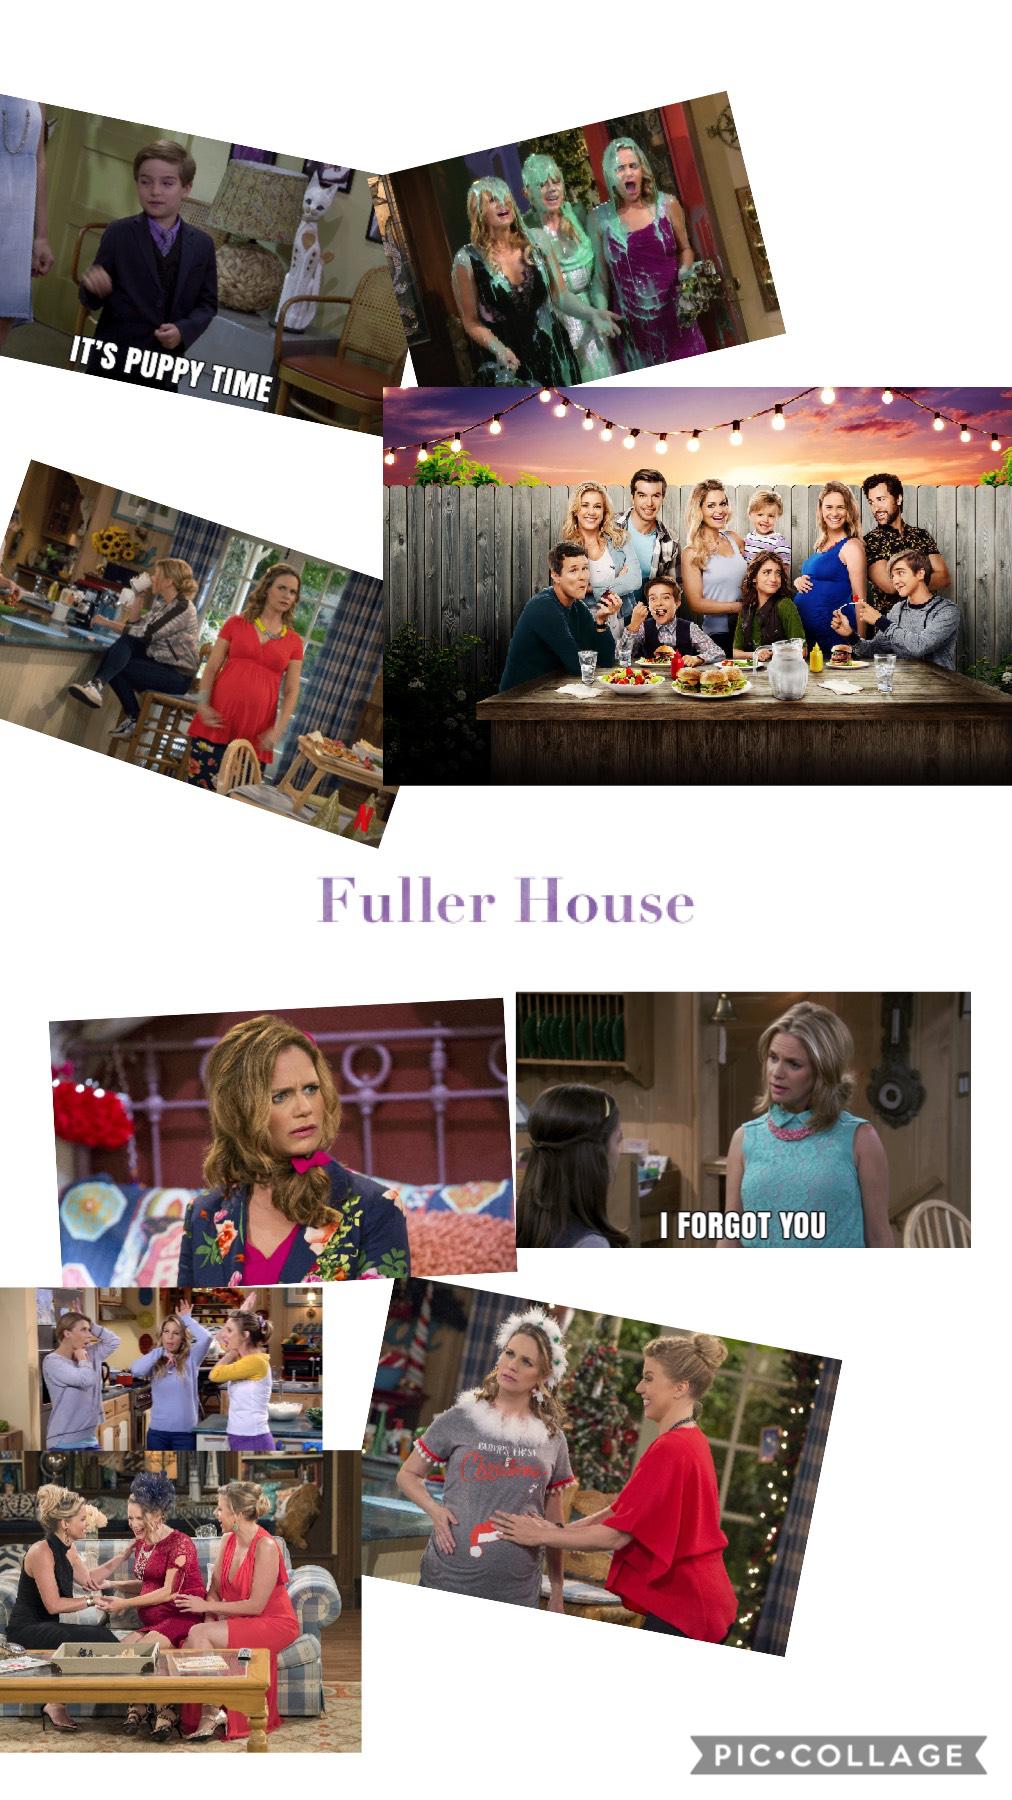 Repost this and like if you love Fuller House! Season 5 out this Fall!